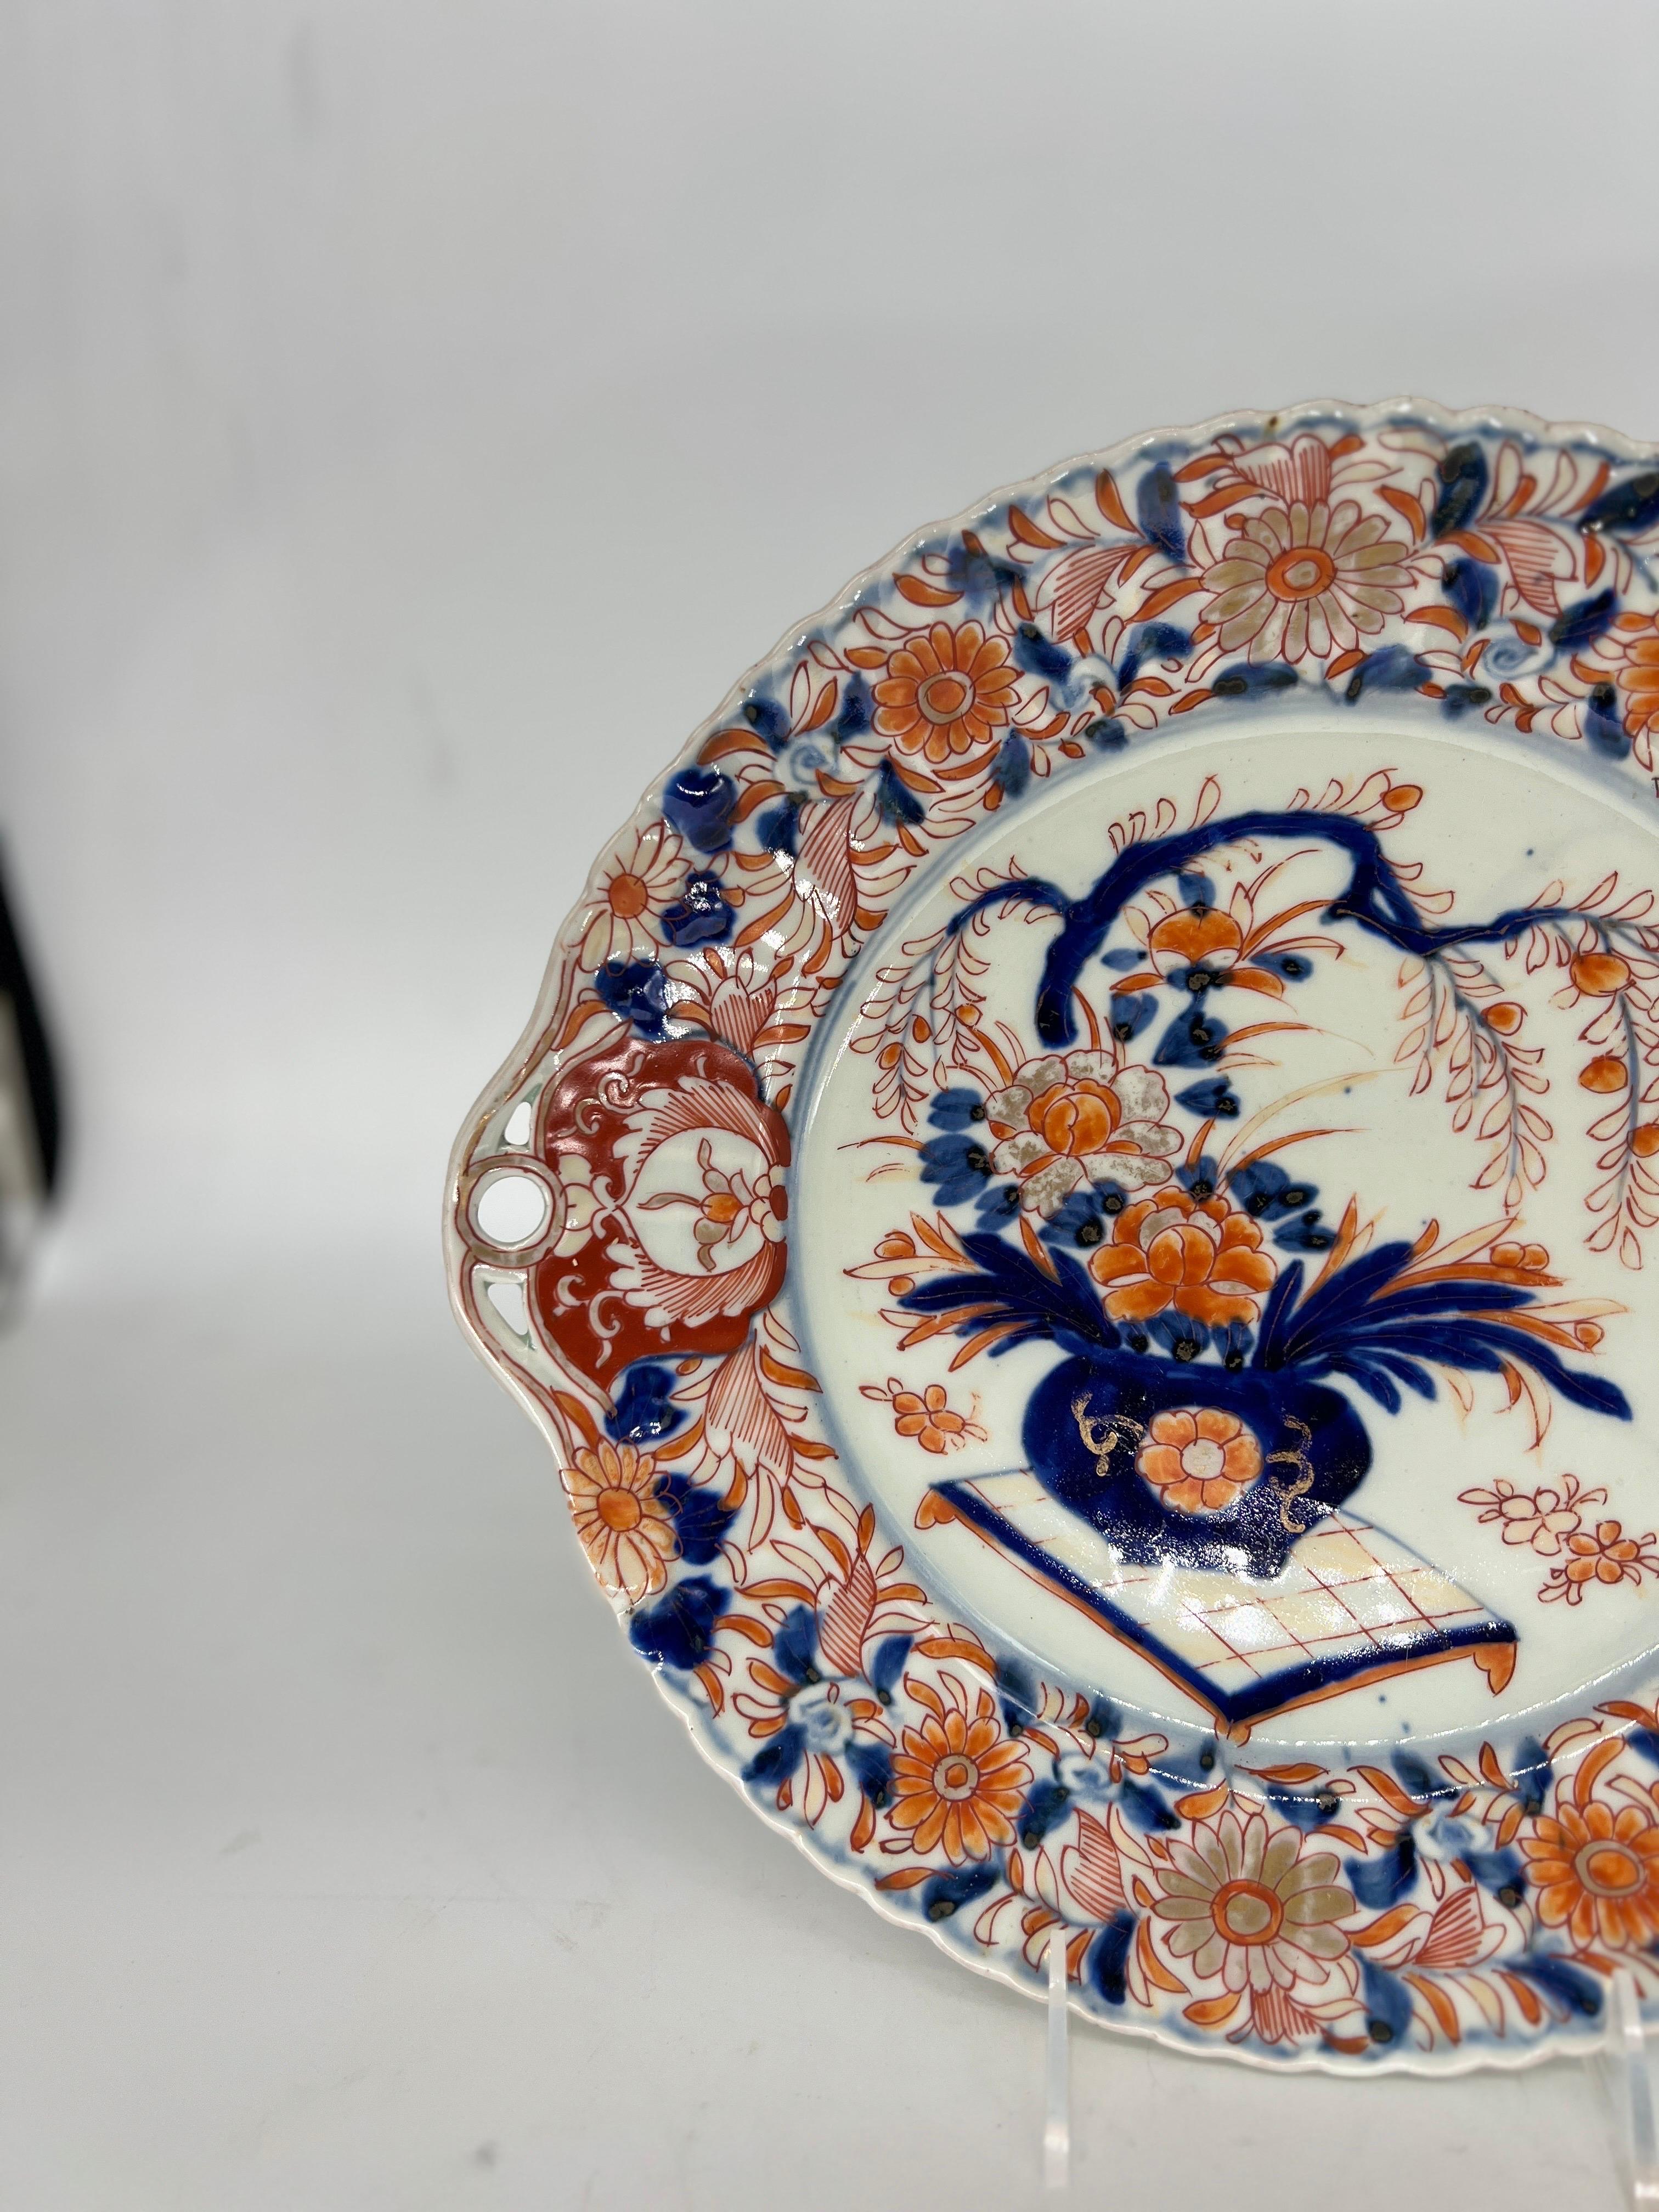 An antique Japanese porcelain Imari pattern platter. The platter is decorated with orange, red, blue and gold tone floral / foliate motifs to the edges. Which surround a central bonsai tree decoration to the center. Some would call the platter a